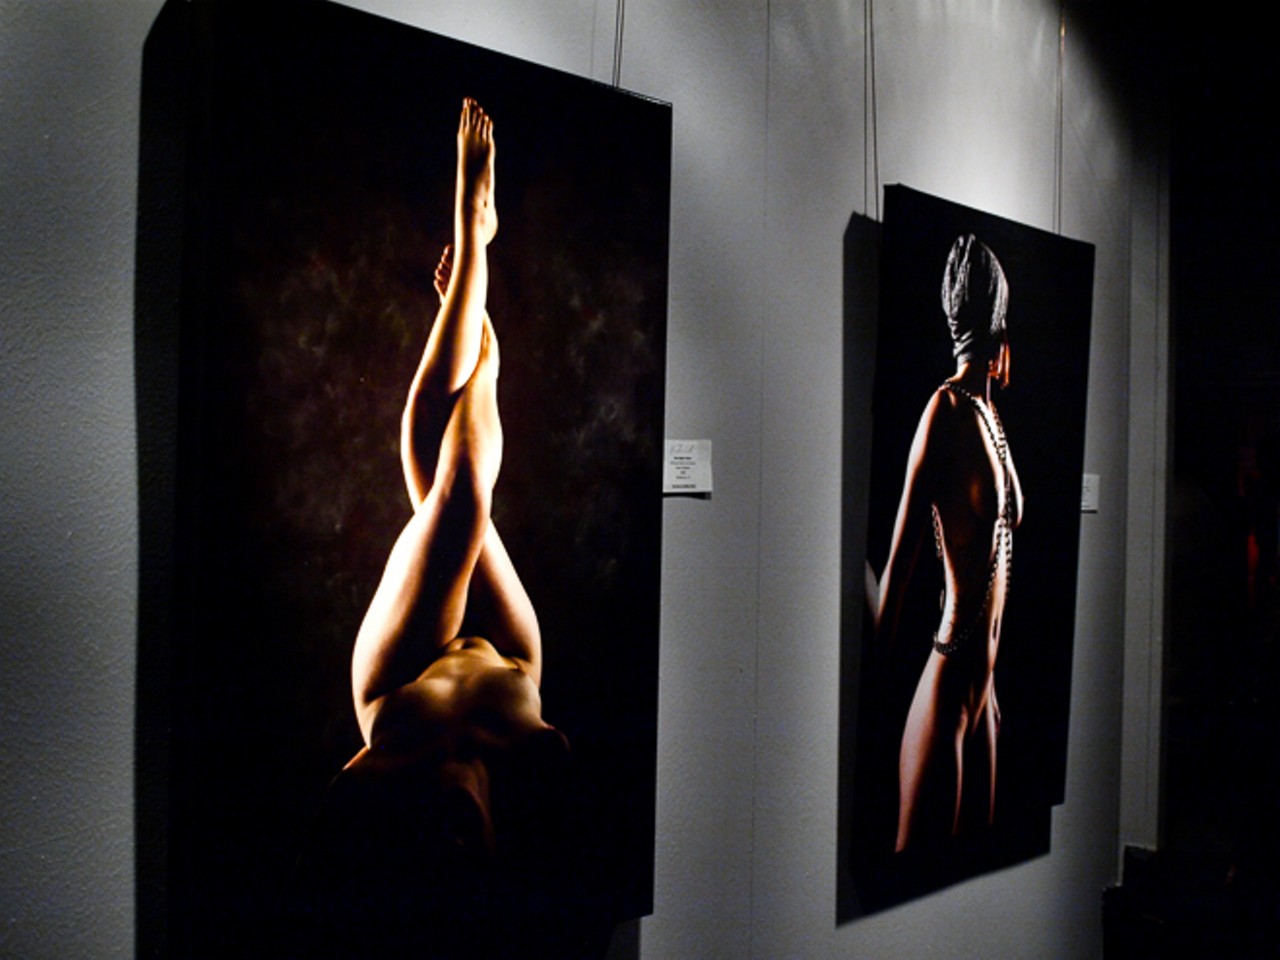 88 amazing photos from Nude Nite 2015 (NSFW)